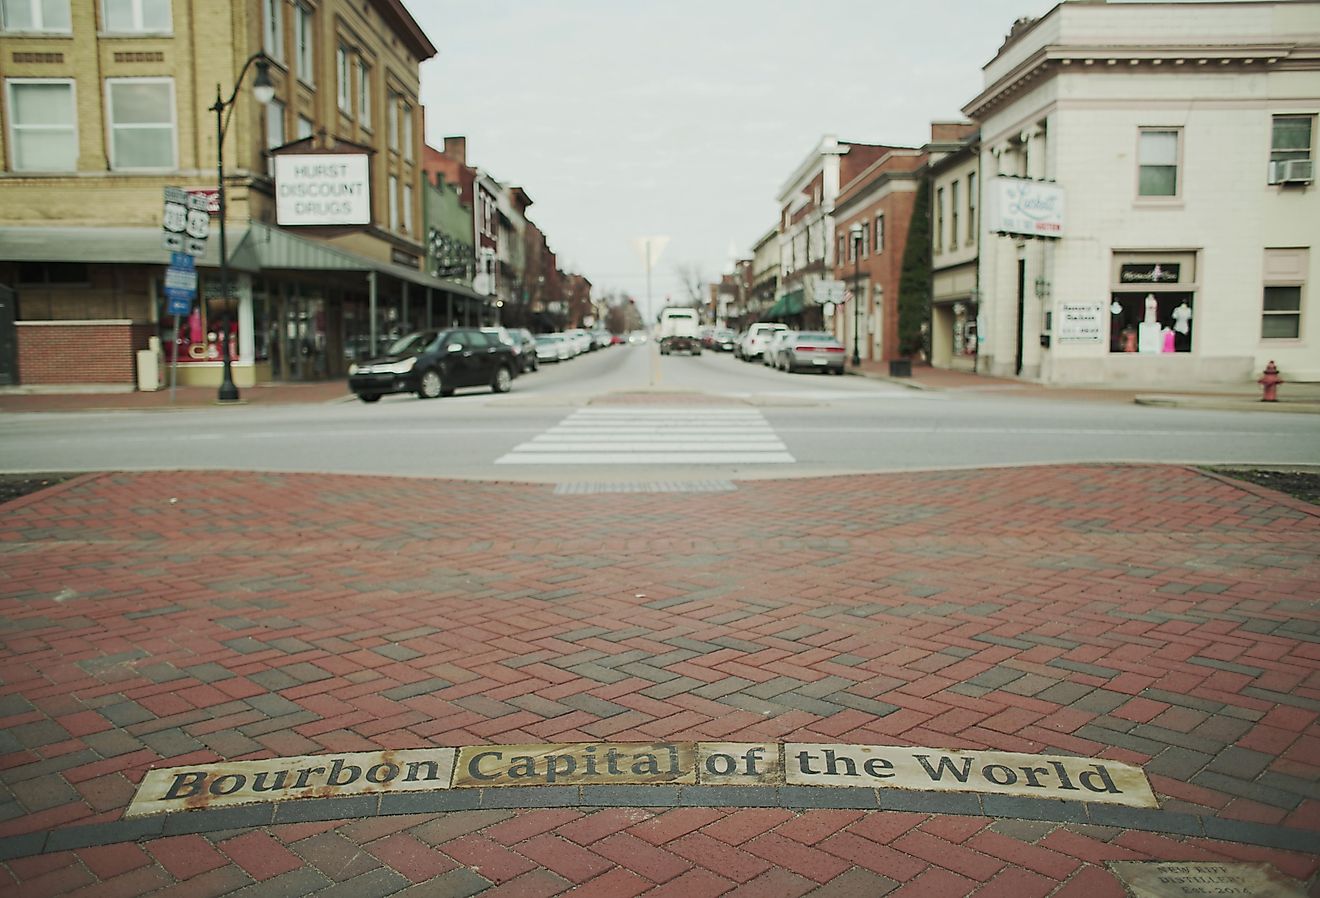 Bourbon capital of the world sign and downtown view of Bardstown, Kentucky. Image credit University of College via Shutterstock.